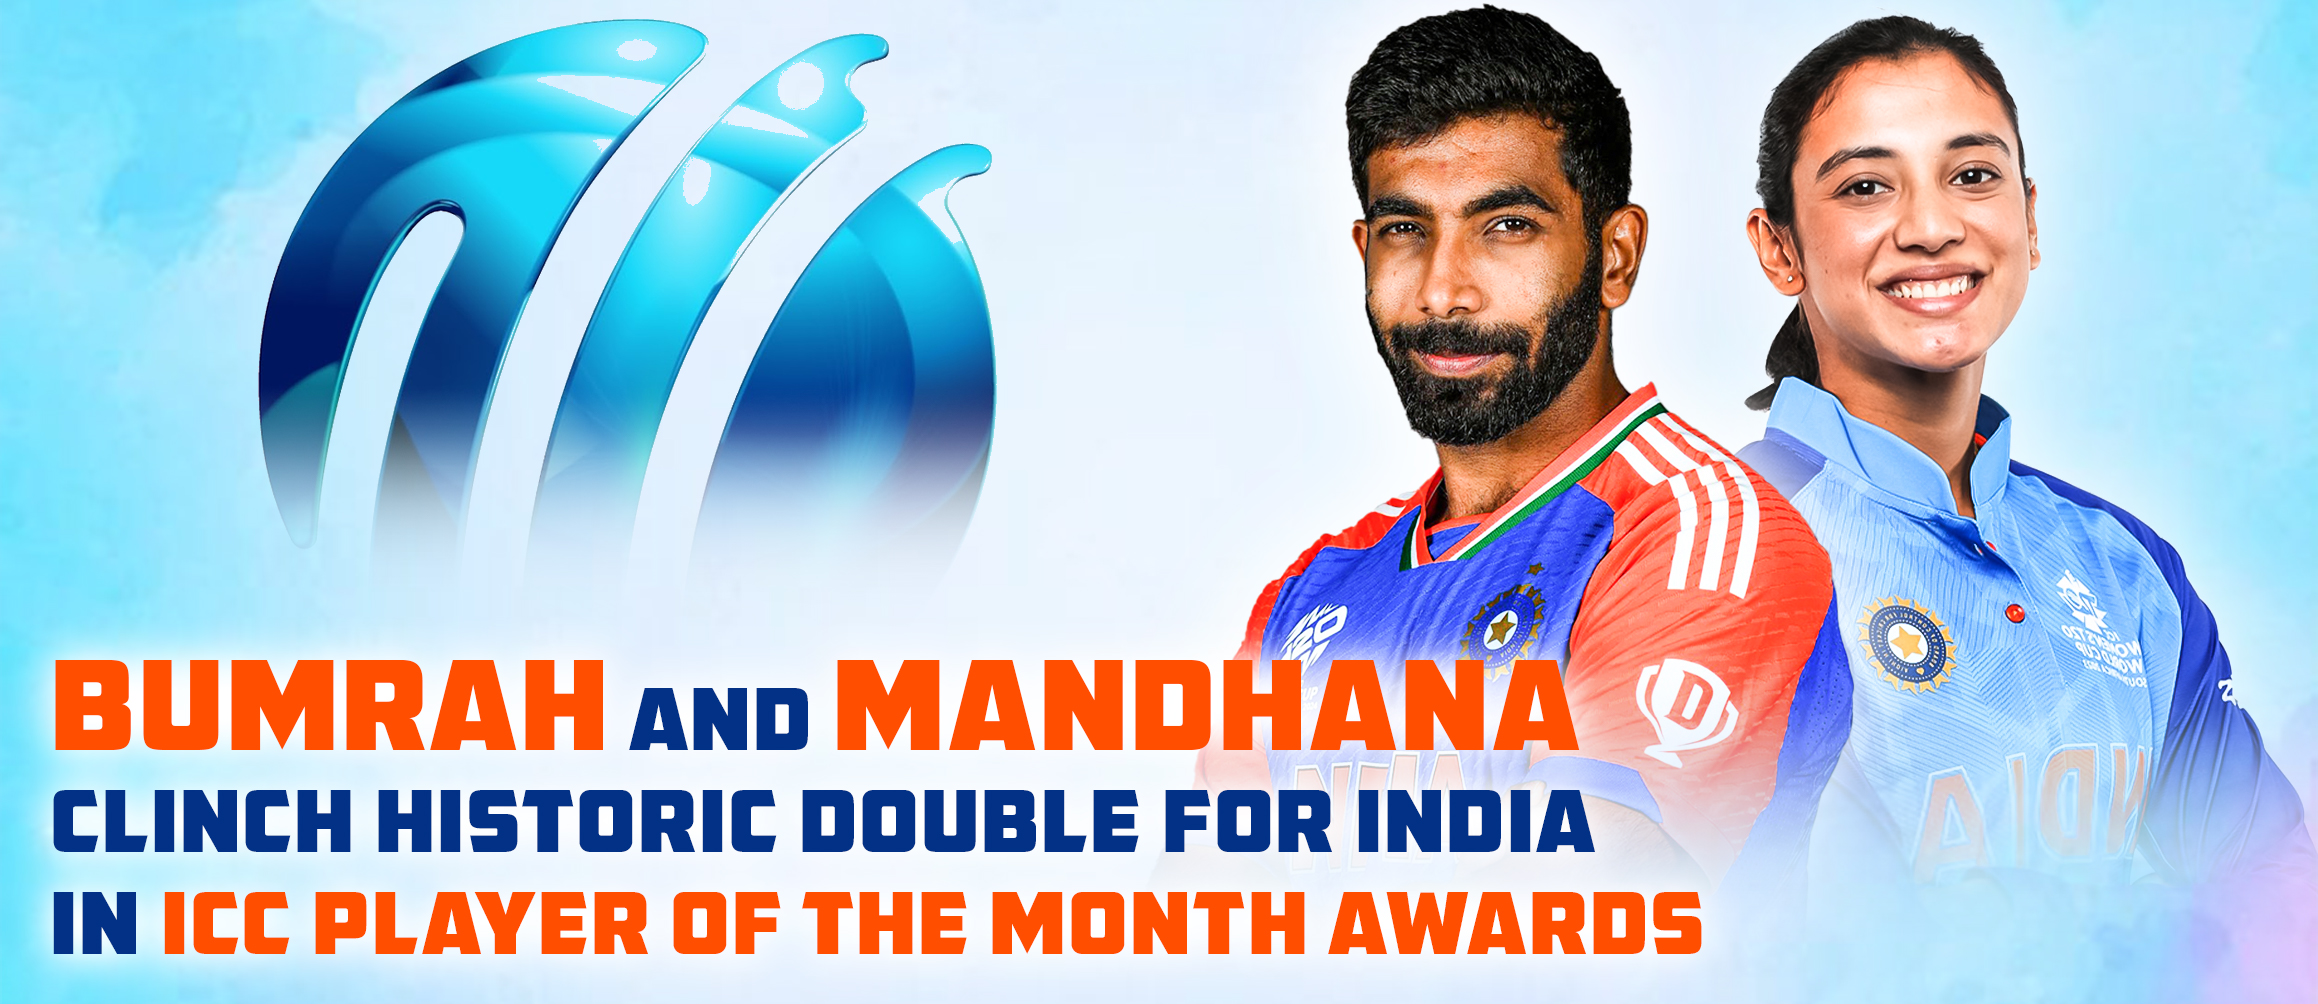 Bumrah and Mandhana Clinch Historic Double for India in ICC Player of the Month Awards